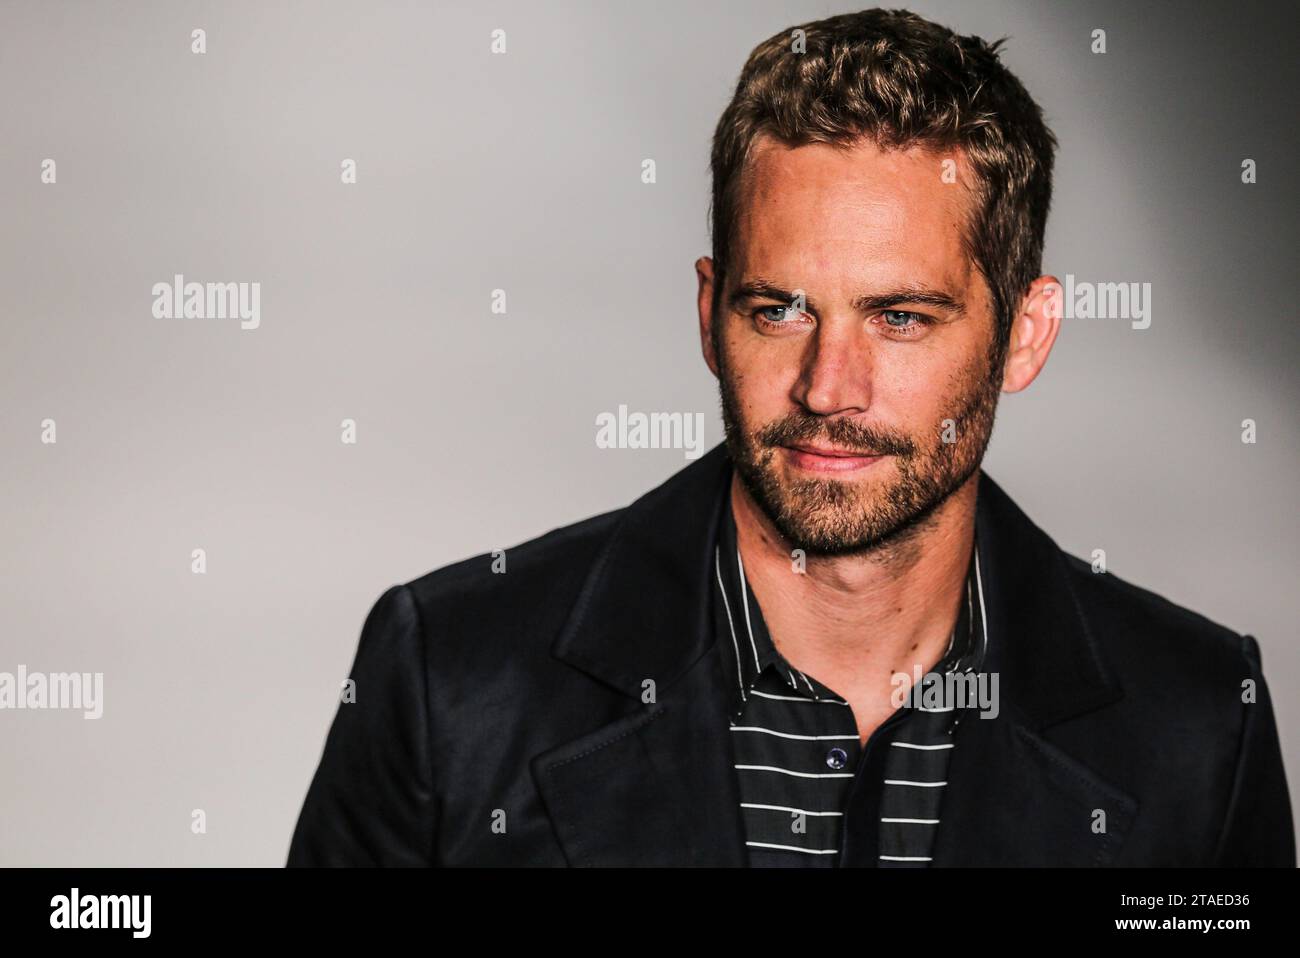 ATTENTION EDITOR - FILE PHOTO FROM 03/21/2013 - SÃO PAULO, SP, 03/21/2013 - SÃO PAULO FASHION WEEK - PAUL WALKER - Ten years since the death of North American actor Paul Walker this Thursday, November 30, 2023 in file photo the actor Paul Walker during the Colcci Spring-Summer 2013/14 collection fashion show at São Paulo Fashion Week (SPFW) in Ibirapuera Biennial Pavilion in the southern region of the city of São Paulo on March 21, 2013. Credit: Brazil Photo Press/Alamy Live News Stock Photo